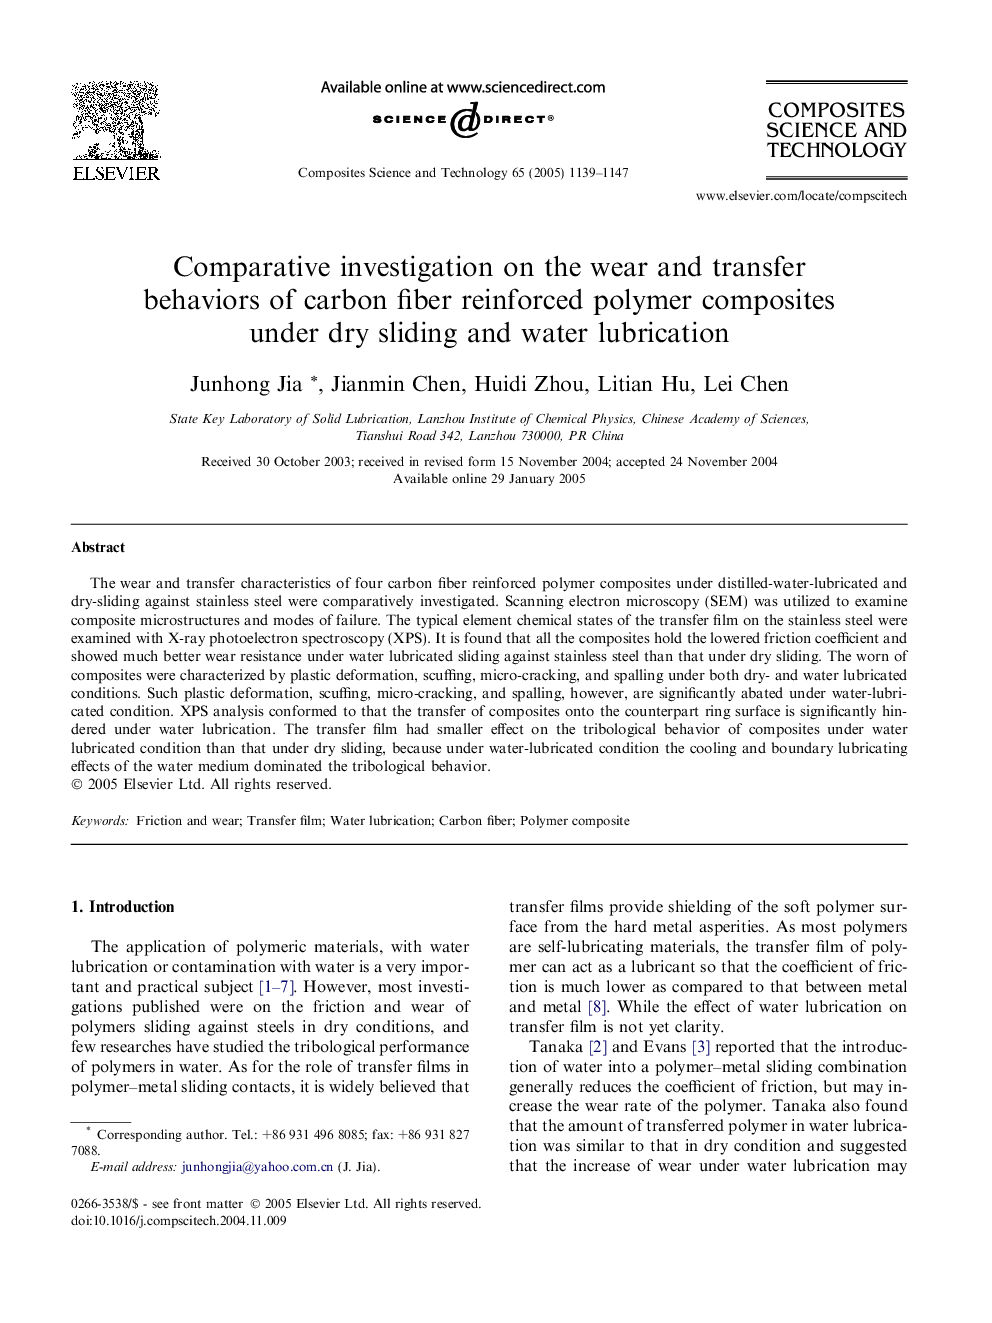 Comparative investigation on the wear and transfer behaviors of carbon fiber reinforced polymer composites under dry sliding and water lubrication